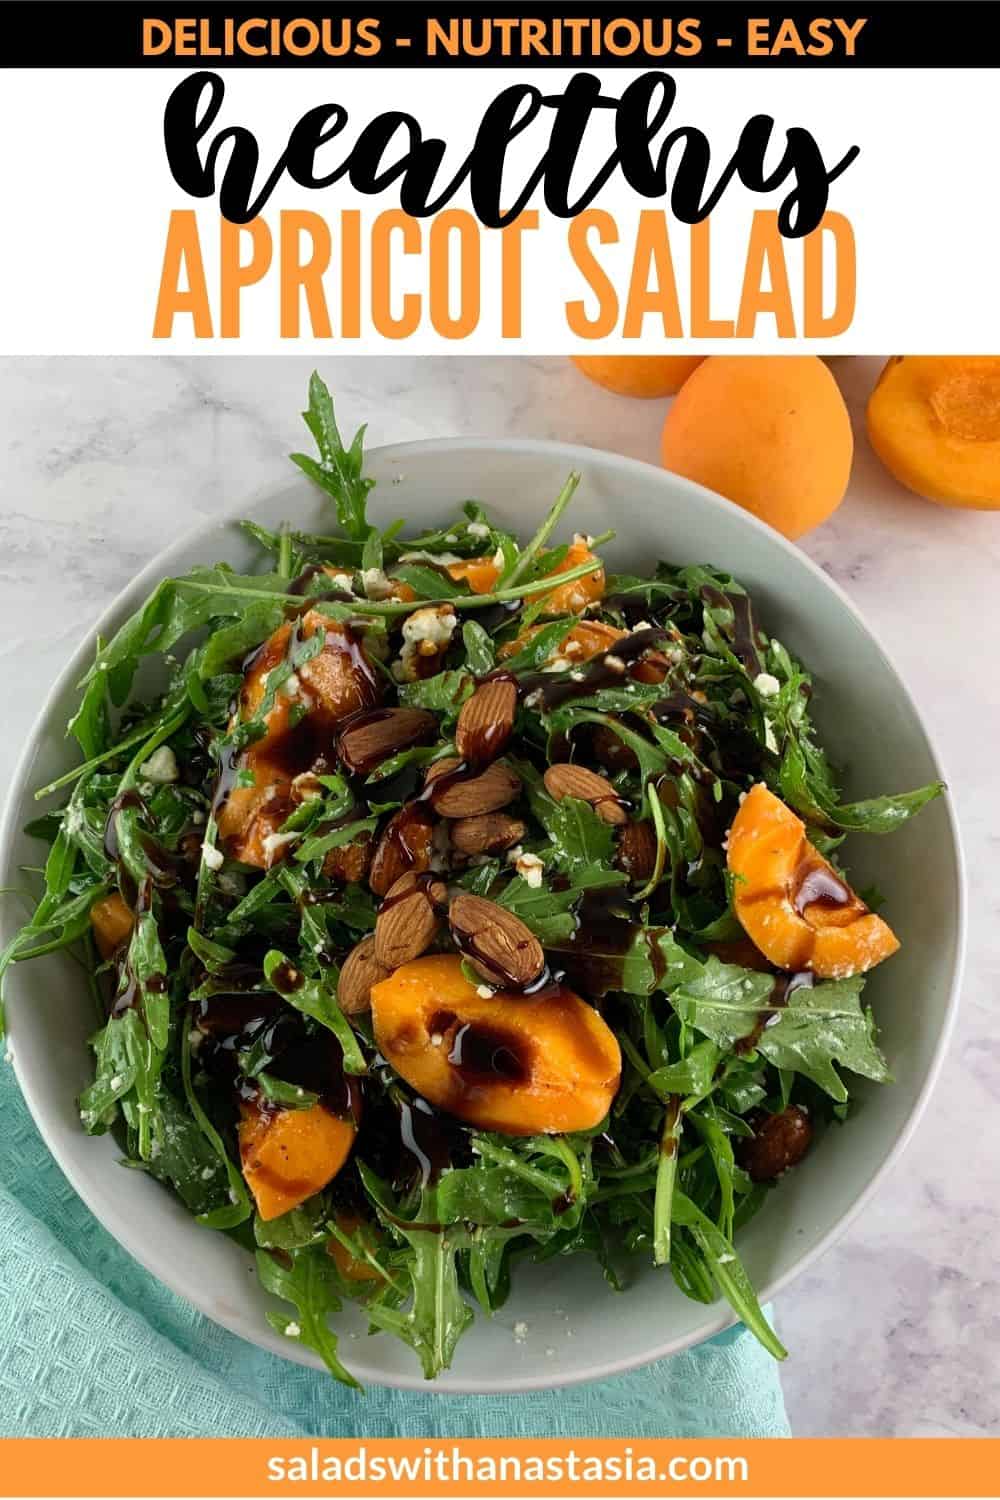 Apricot Salad in a white bowl with mint towel on bottom left and apricots on top right,and a text overlay.